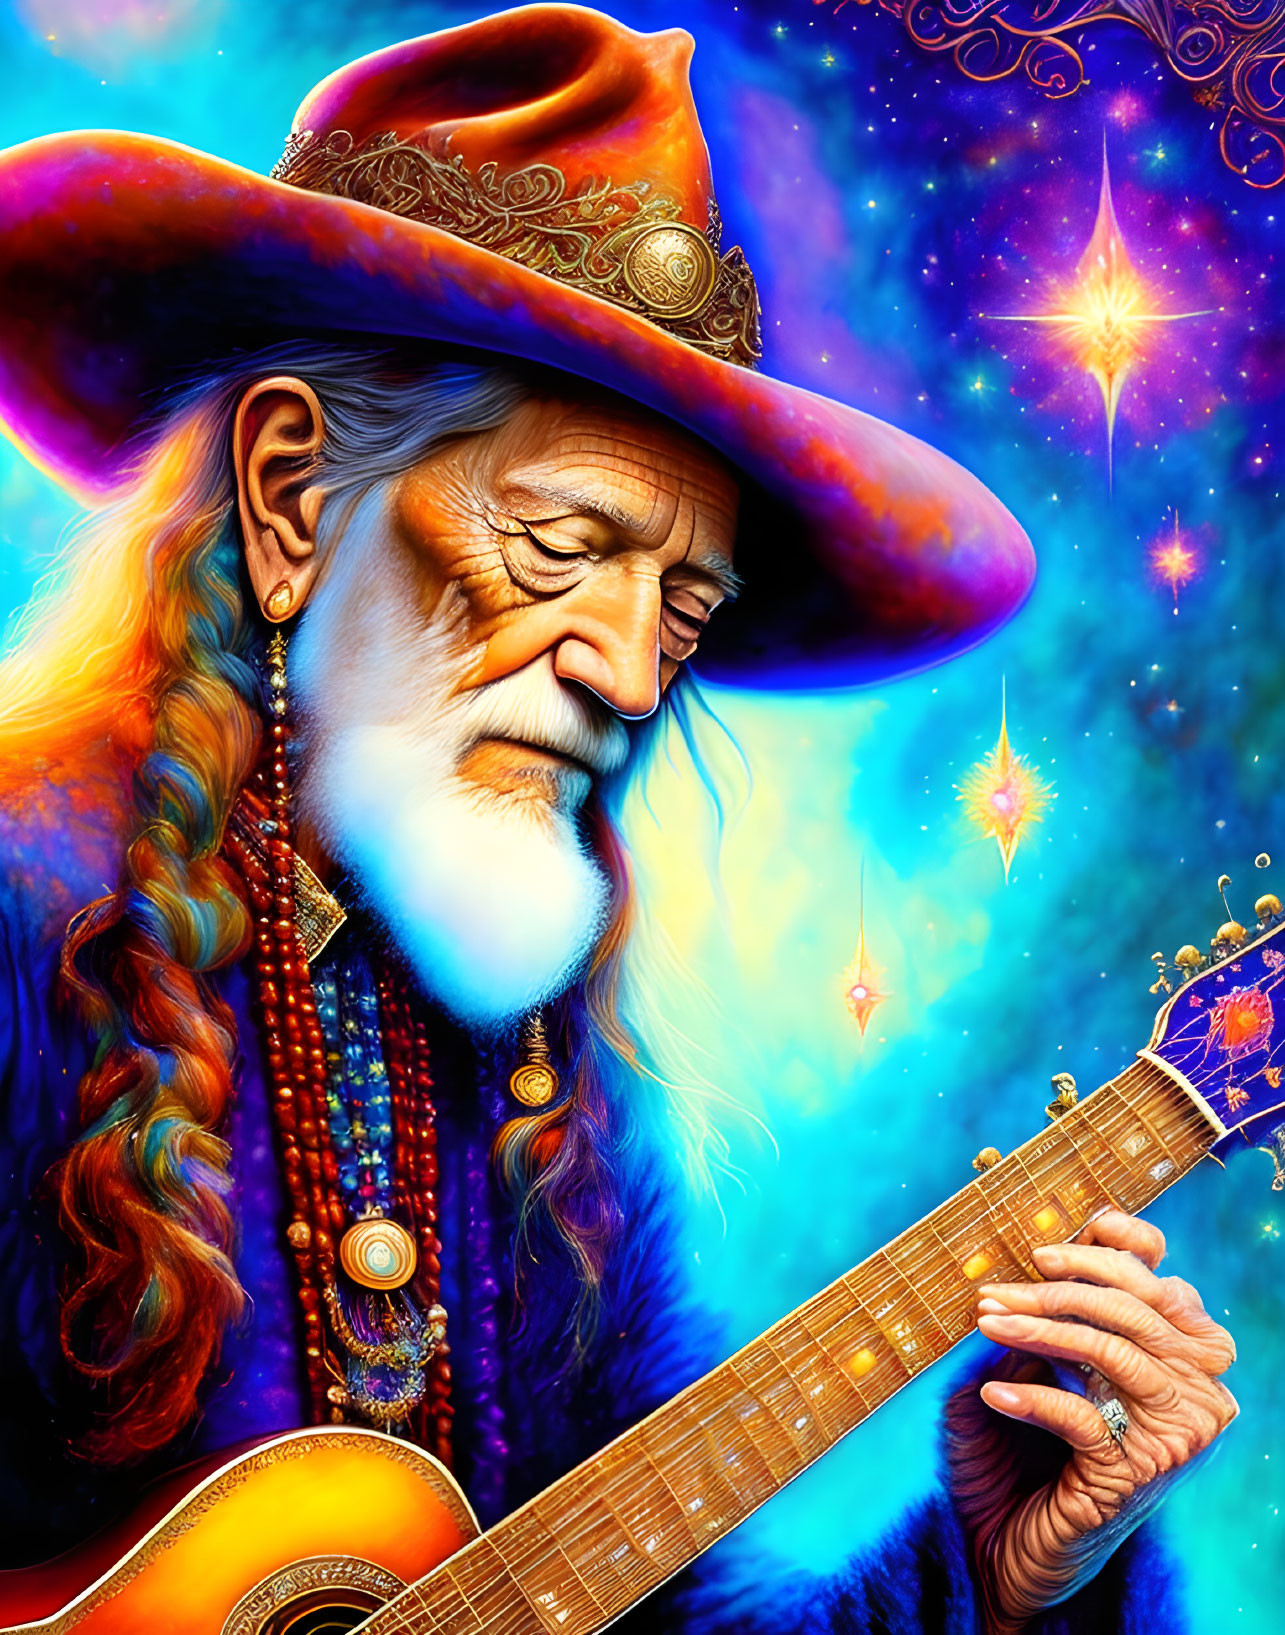 Colorful Cowboy Musician with Guitar in Space-themed Setting